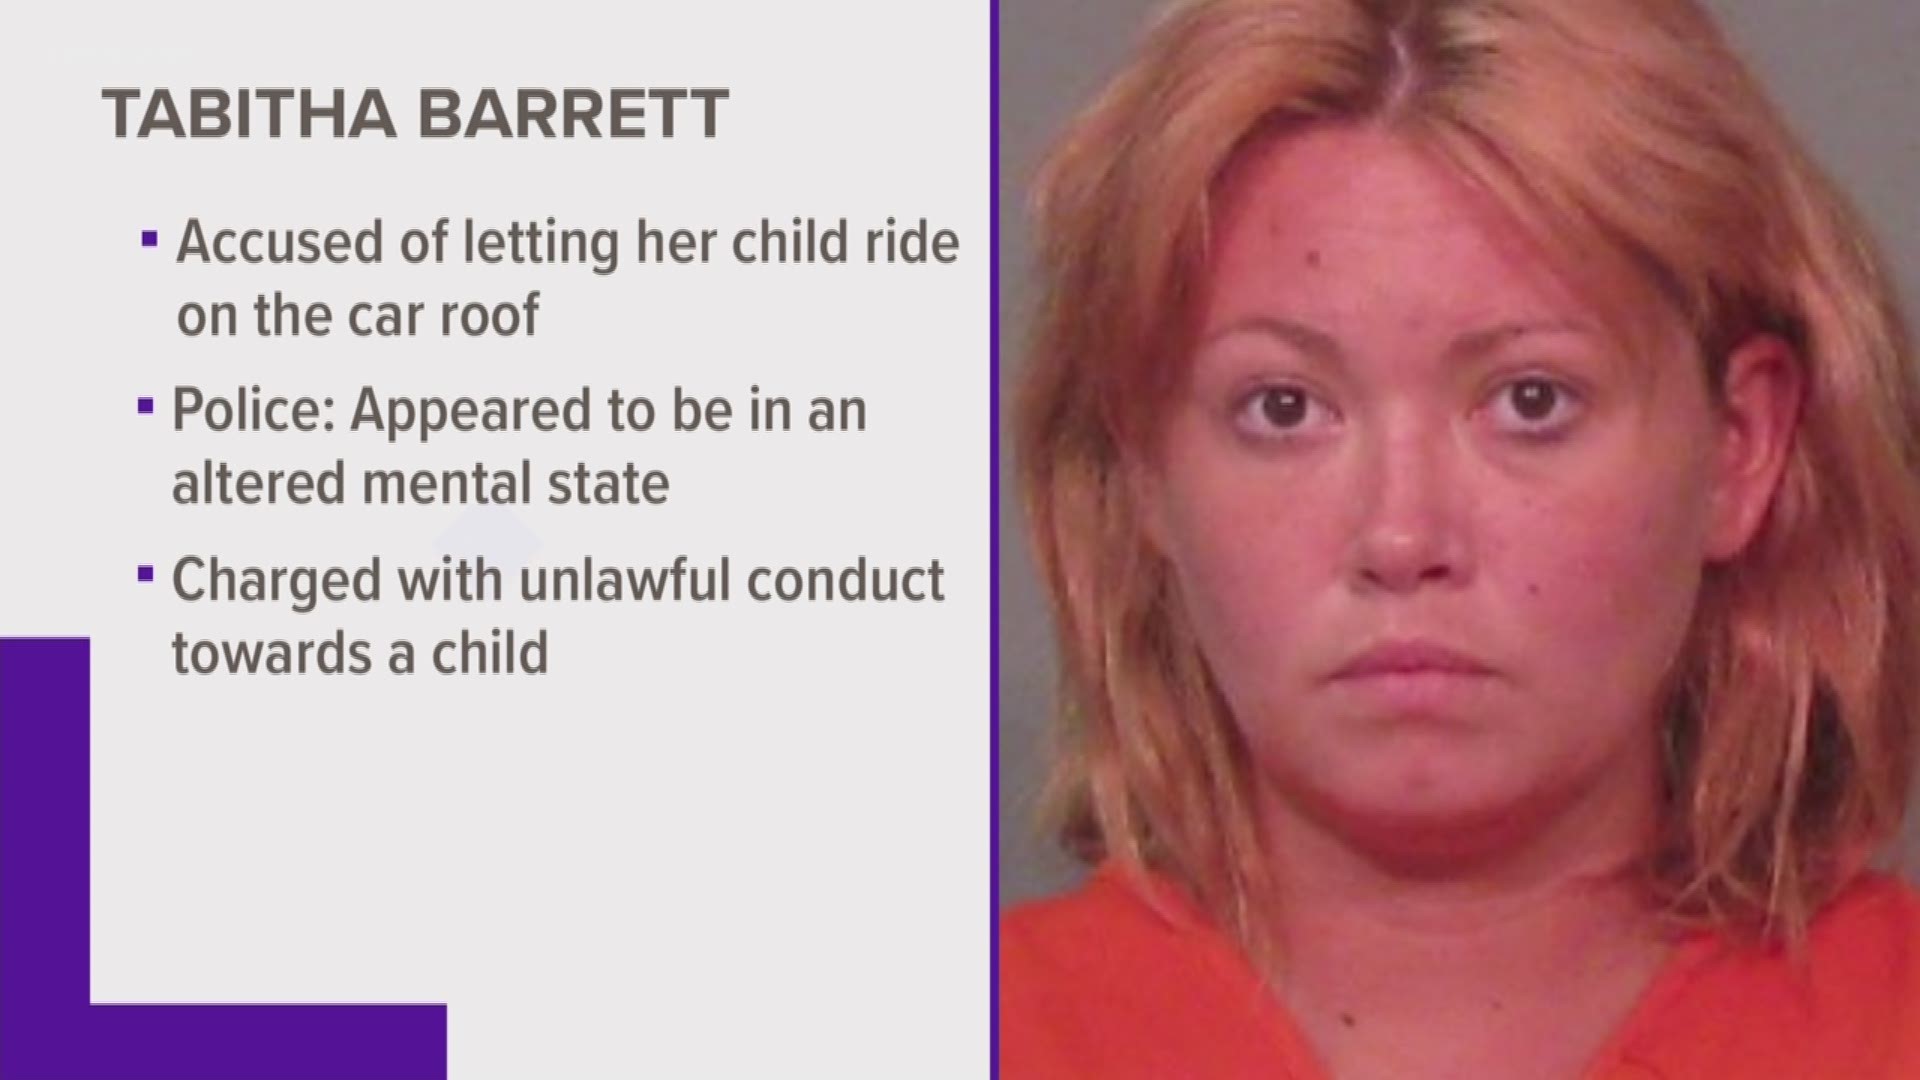 According to officers, the suspect, Tabitha Barrett, denied that she allowed her child to ride on the roof of the car. Police say she appeared to be in an altered mental state and wasn't able to answer questions clearly. Barrett has been charged with unlawful conduct towards a child.